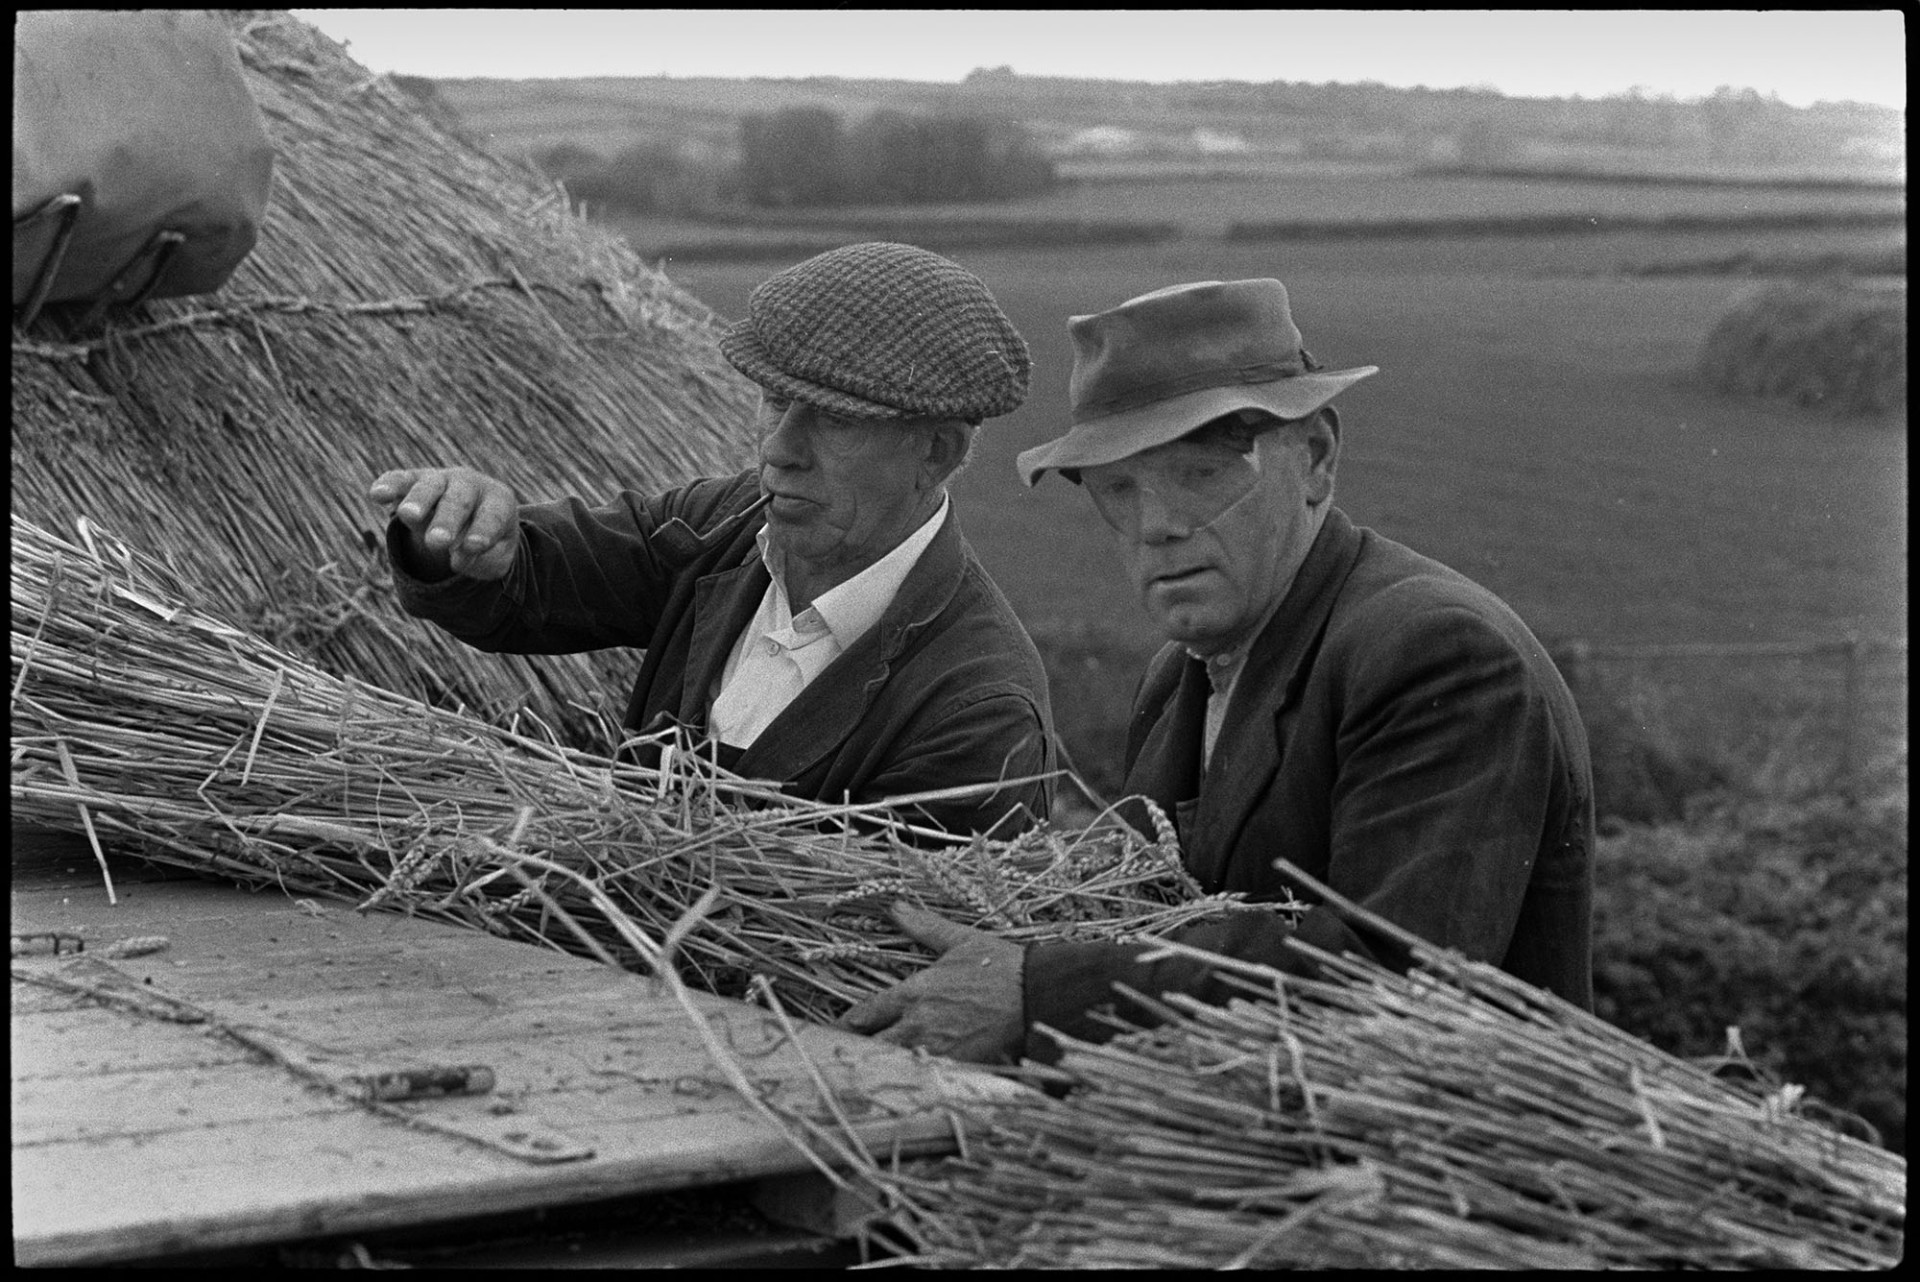 Reed combing, men working, ricks, tractors, etc. <br />
[Two men holding bundles of reed which they are feeding into a reed comber. One man is smoking a pipe and the other man is wearing an eye mask. A thatched wheat rick can be seen in the background.]